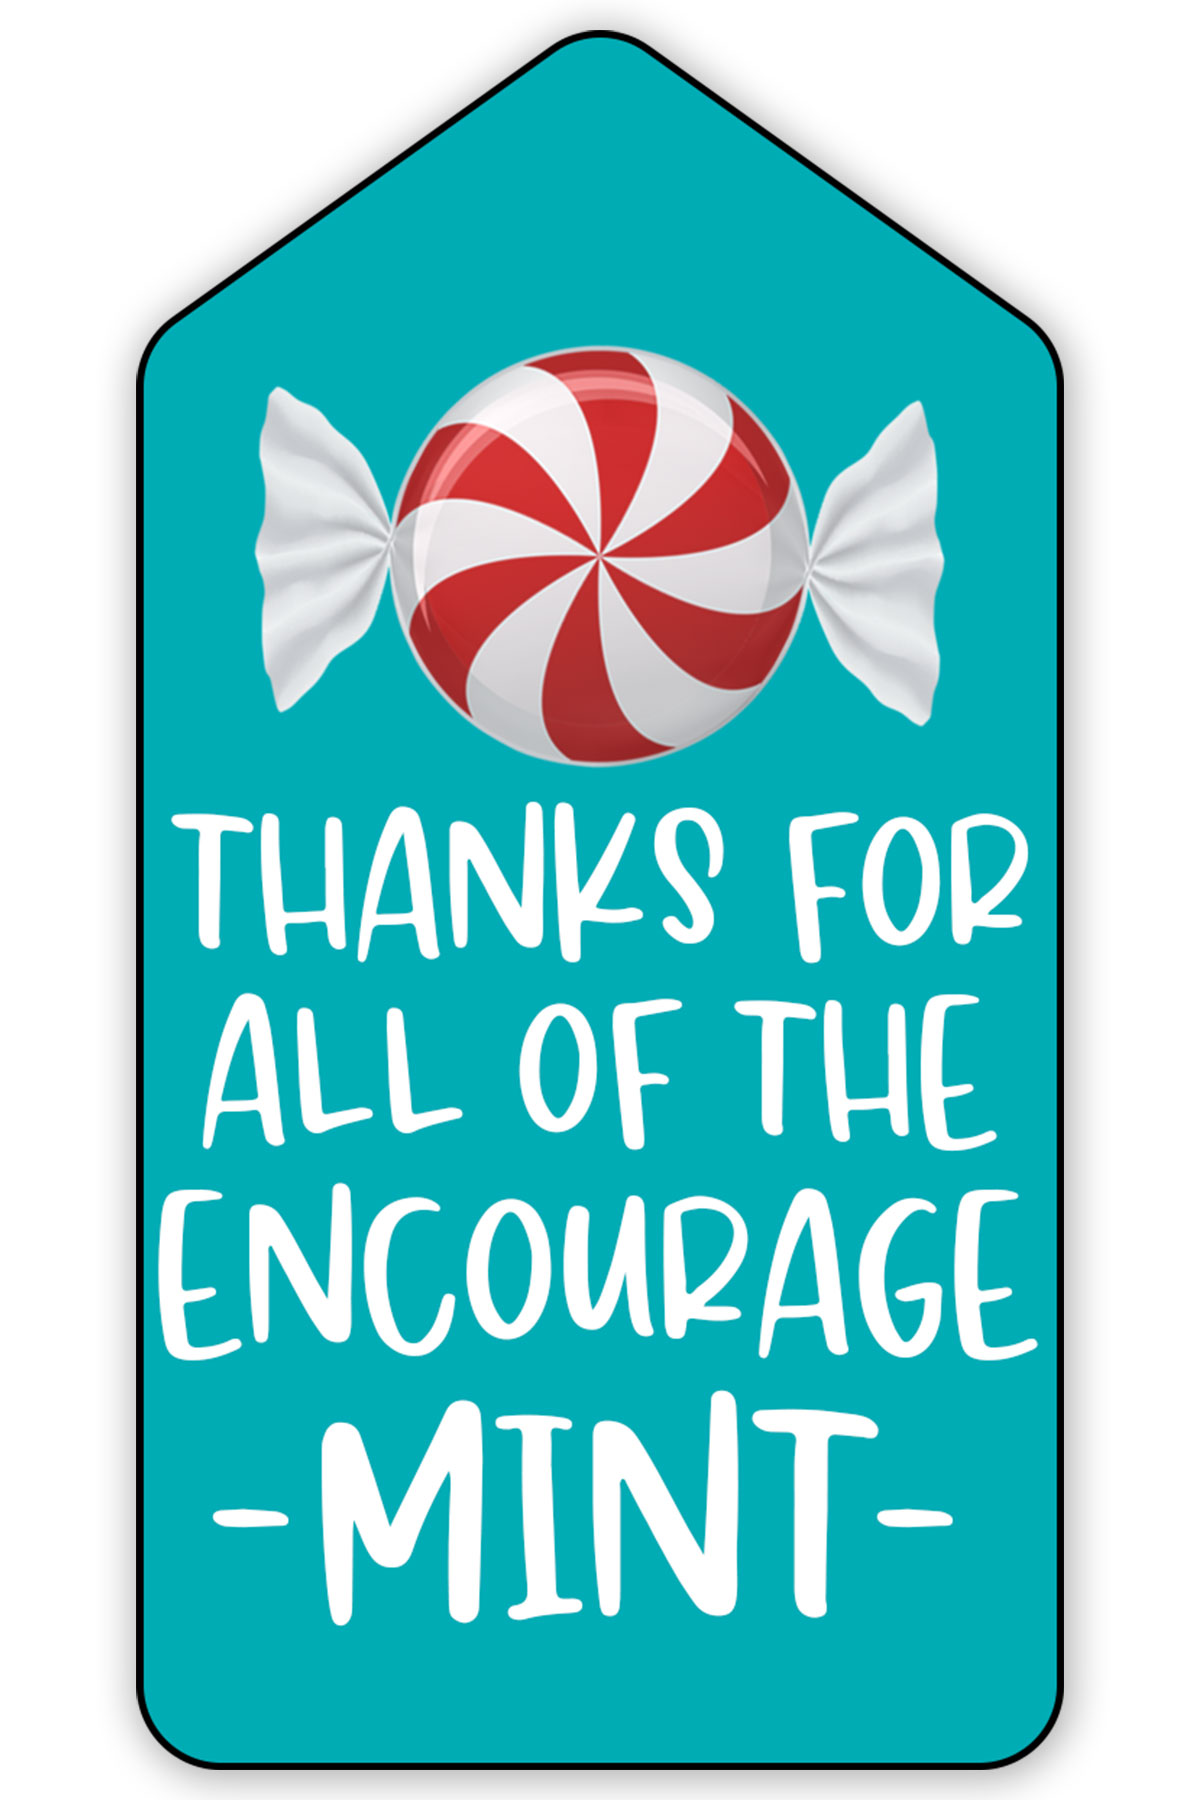 This free printable teacher appreciation gift tag says thanks for all of the encourage-mint.